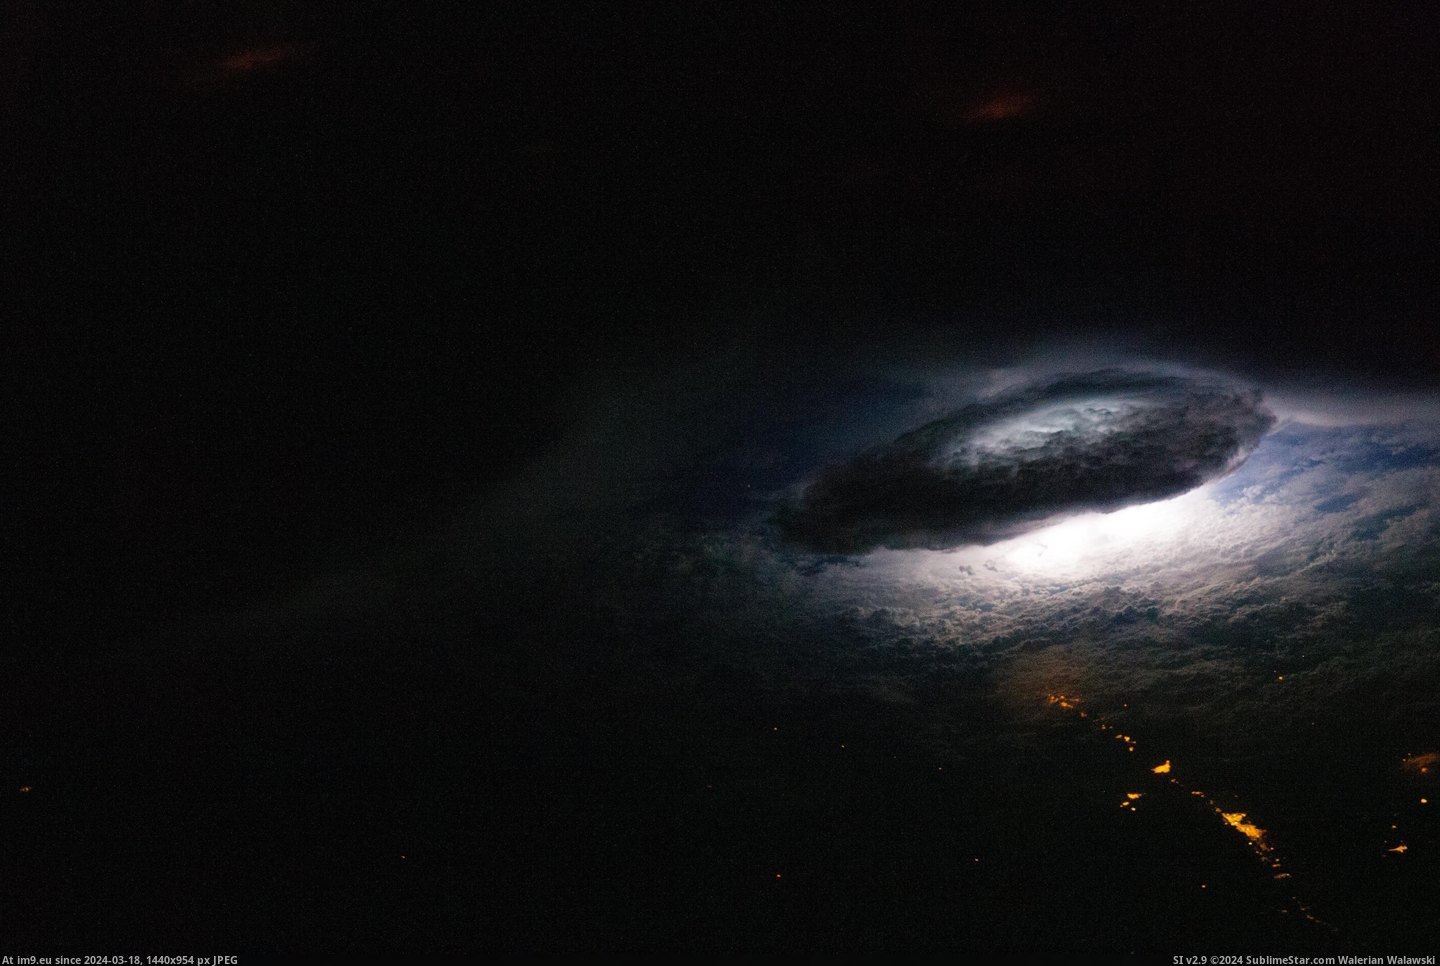 #Space #Nighttime #Thunderstorm [Pics] This is what a nighttime thunderstorm looks like from space Pic. (Image of album My r/PICS favs))